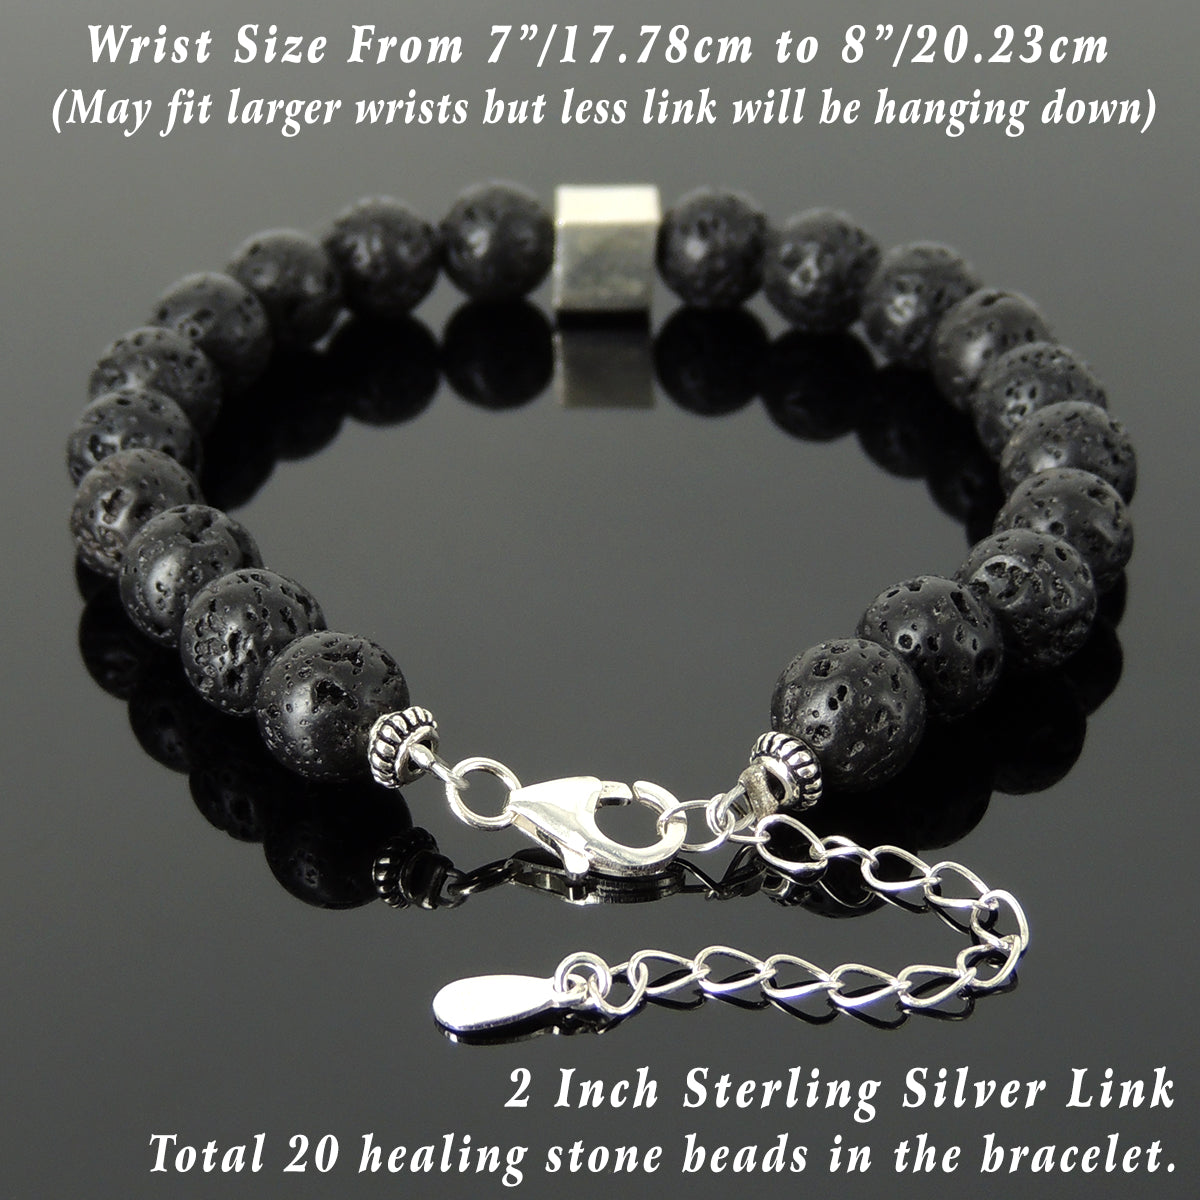 8mm Lava Rock Healing Stone Bracelet with Stability Geometric Balance Cube S925 Sterling Silver Chain & Clasp - Handmade by Gem & Silver BR1427